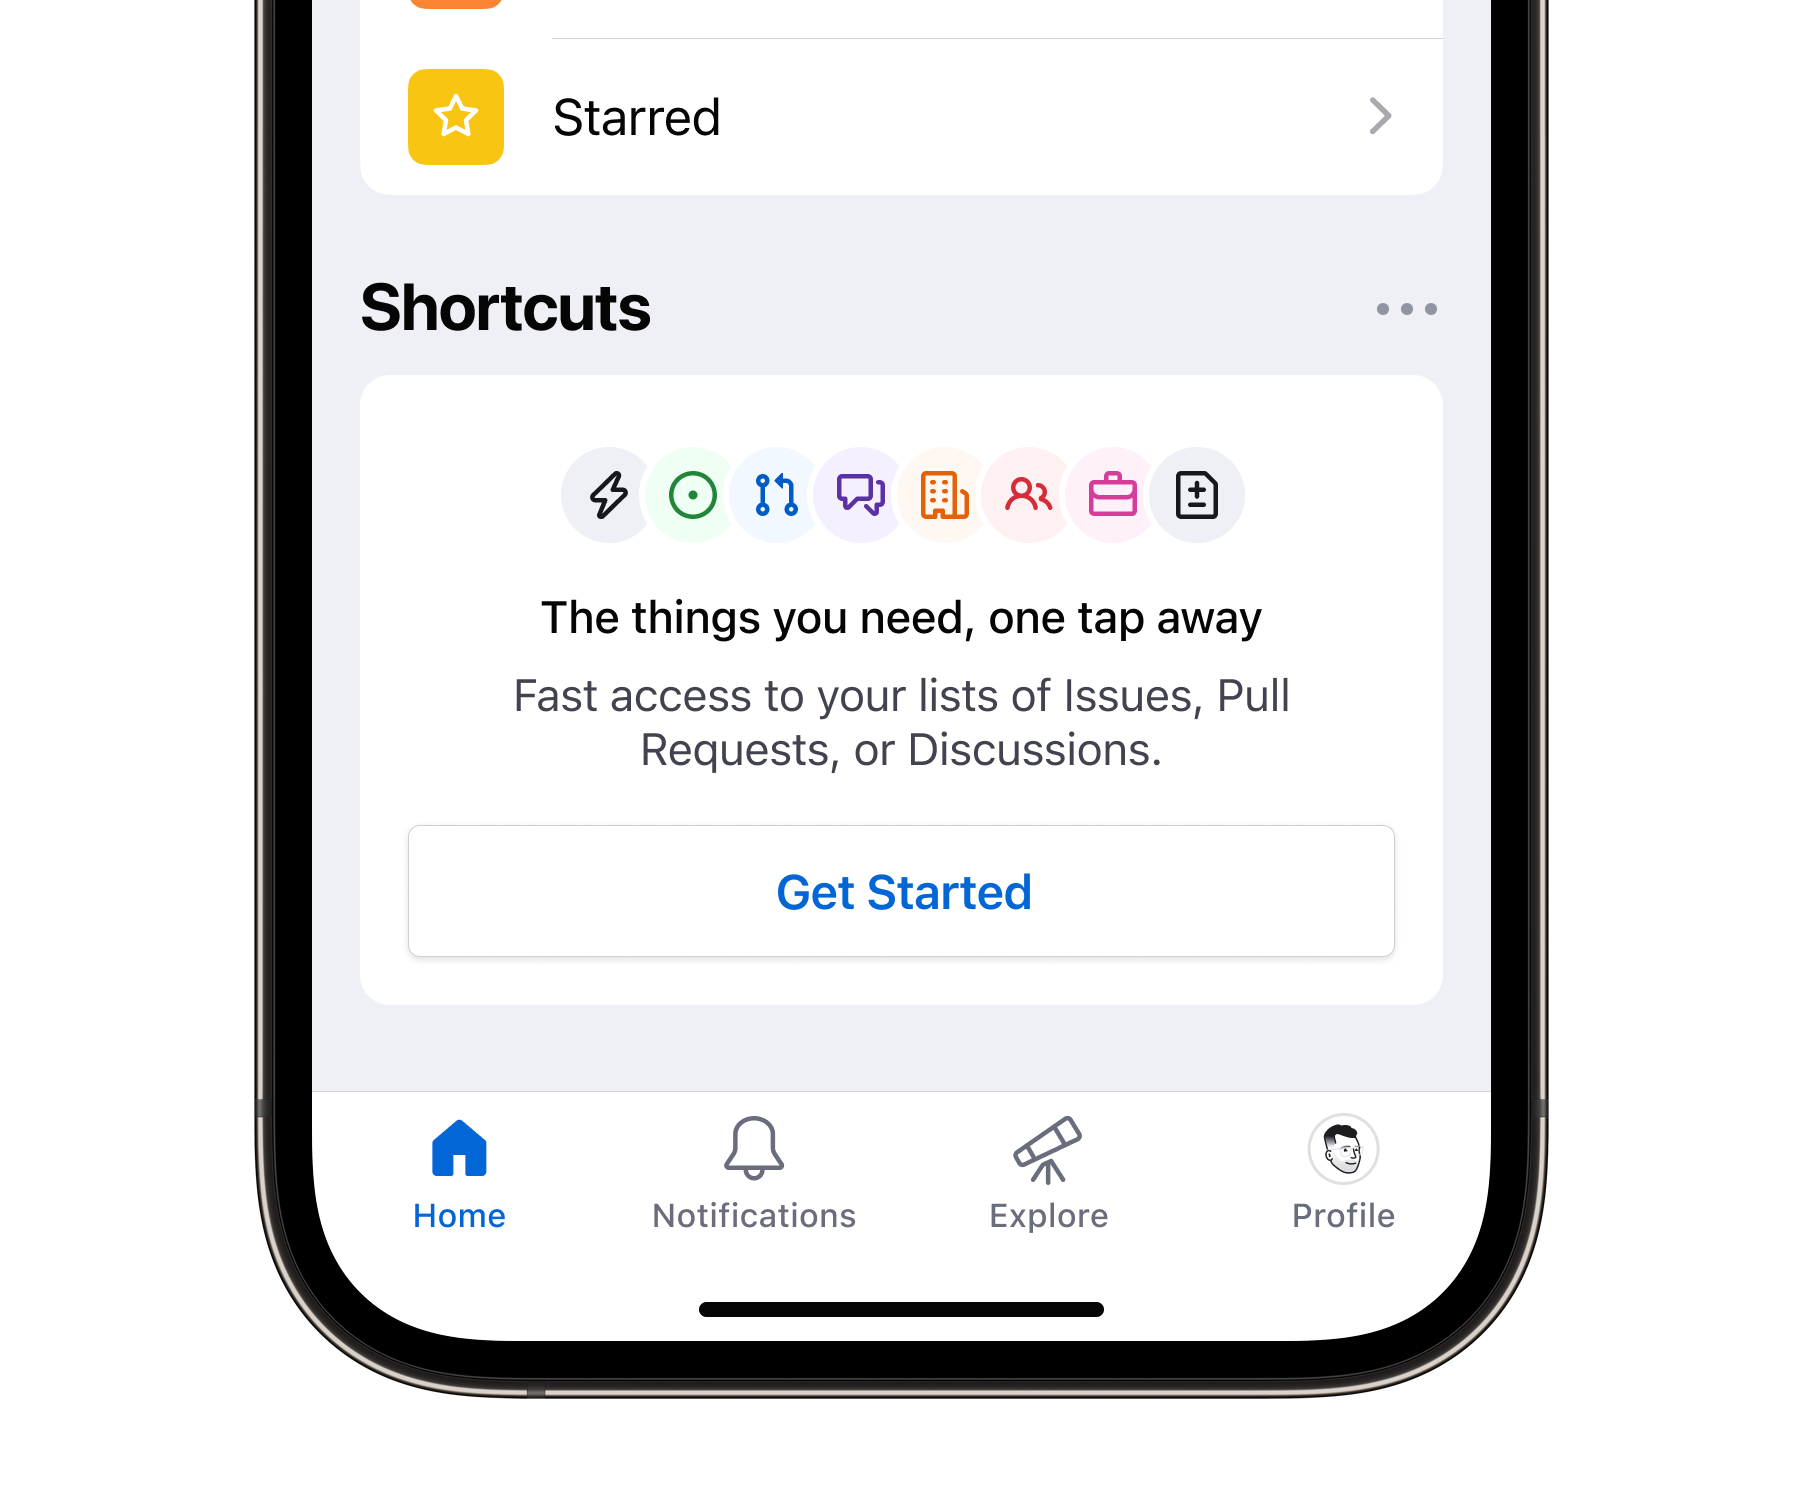 New user experience for Shortcuts